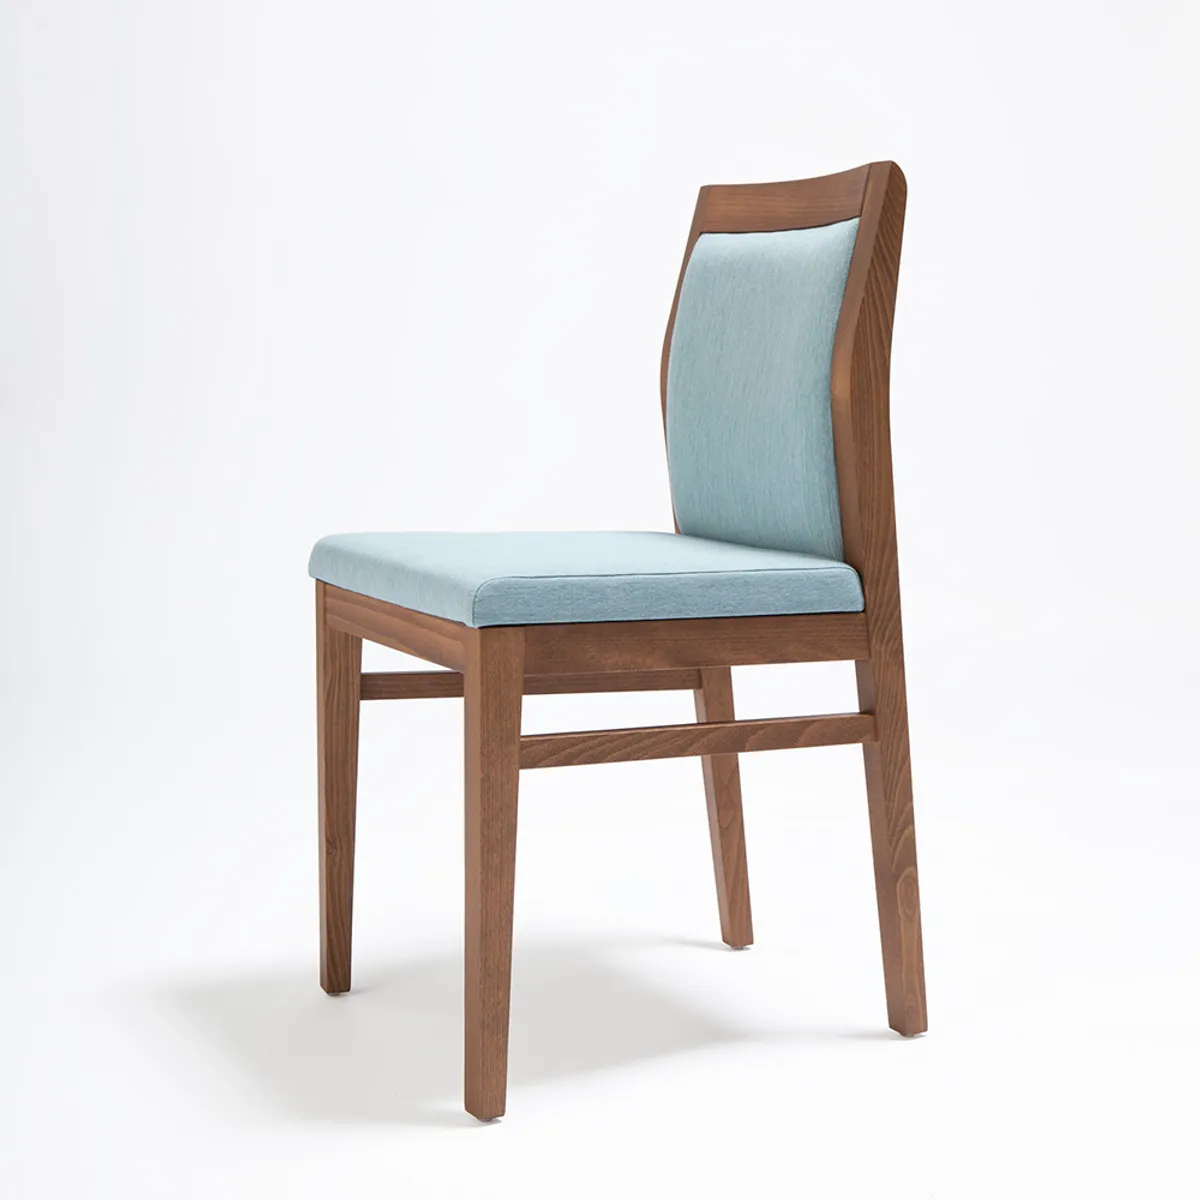 Monte Carlo 7405 Chair Inside Out Contracts